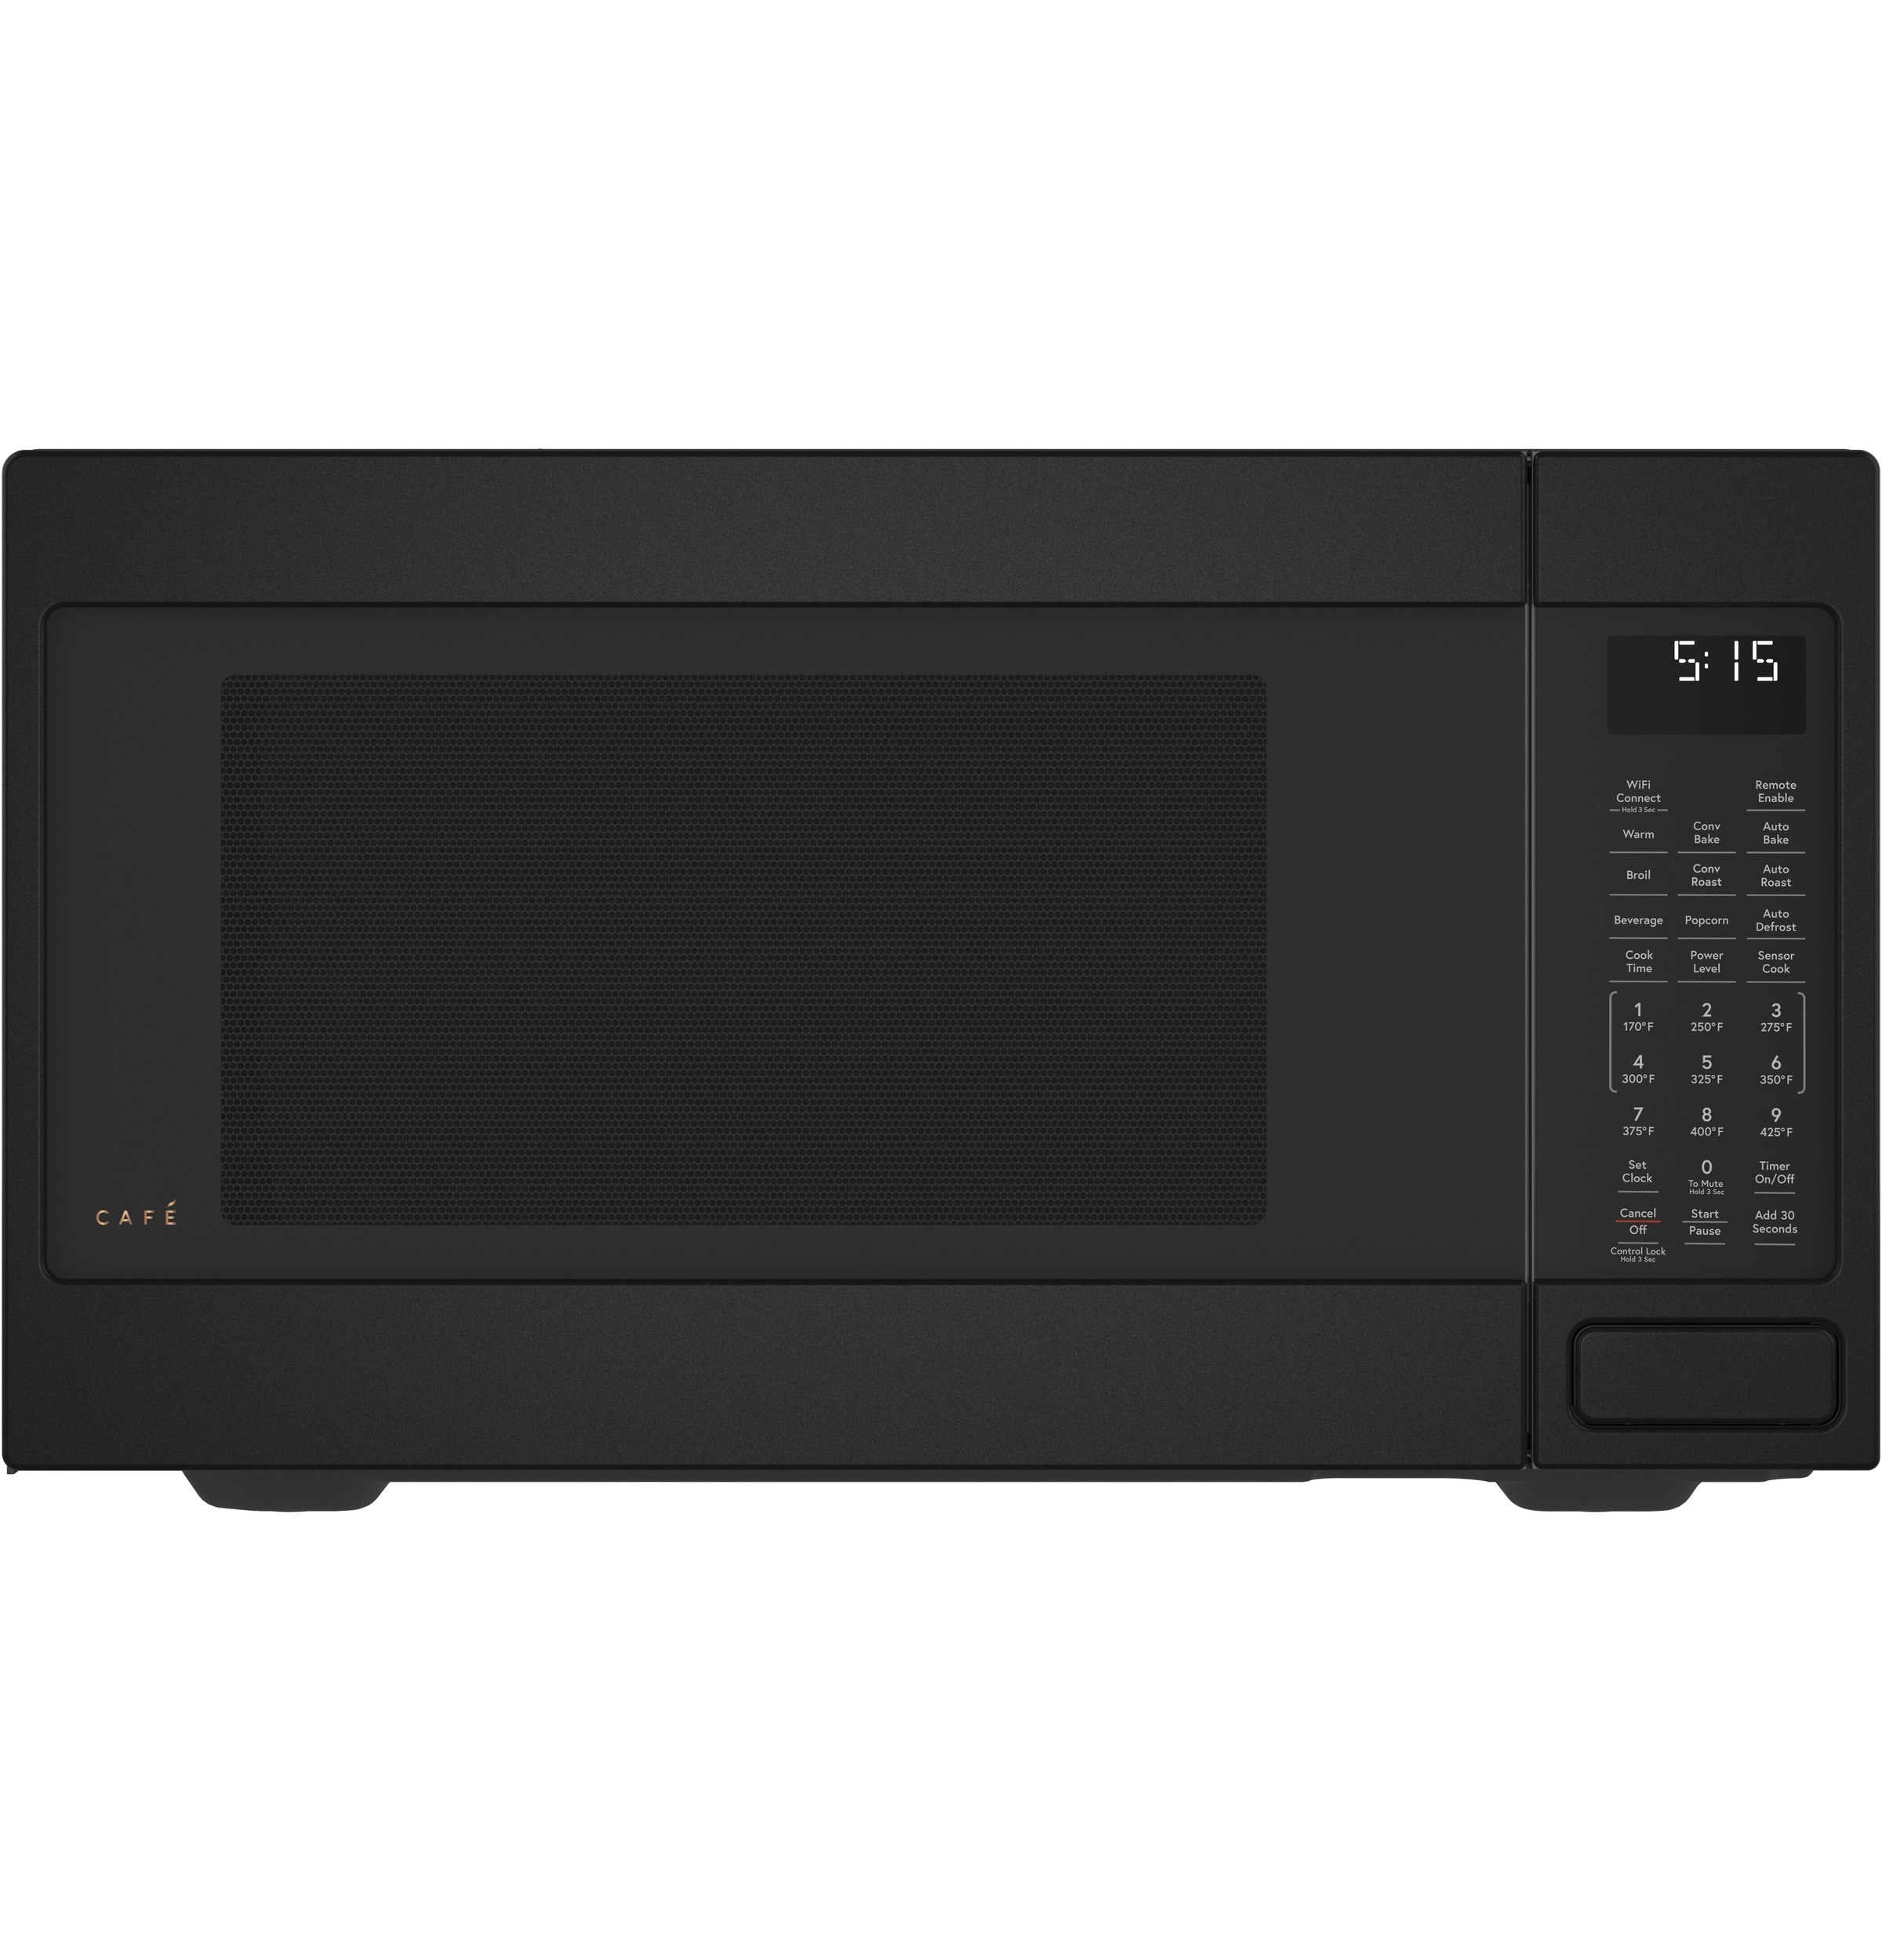 GE 0.9 Cu. Ft. Capacity Smart Countertop Microwave Oven with Scan